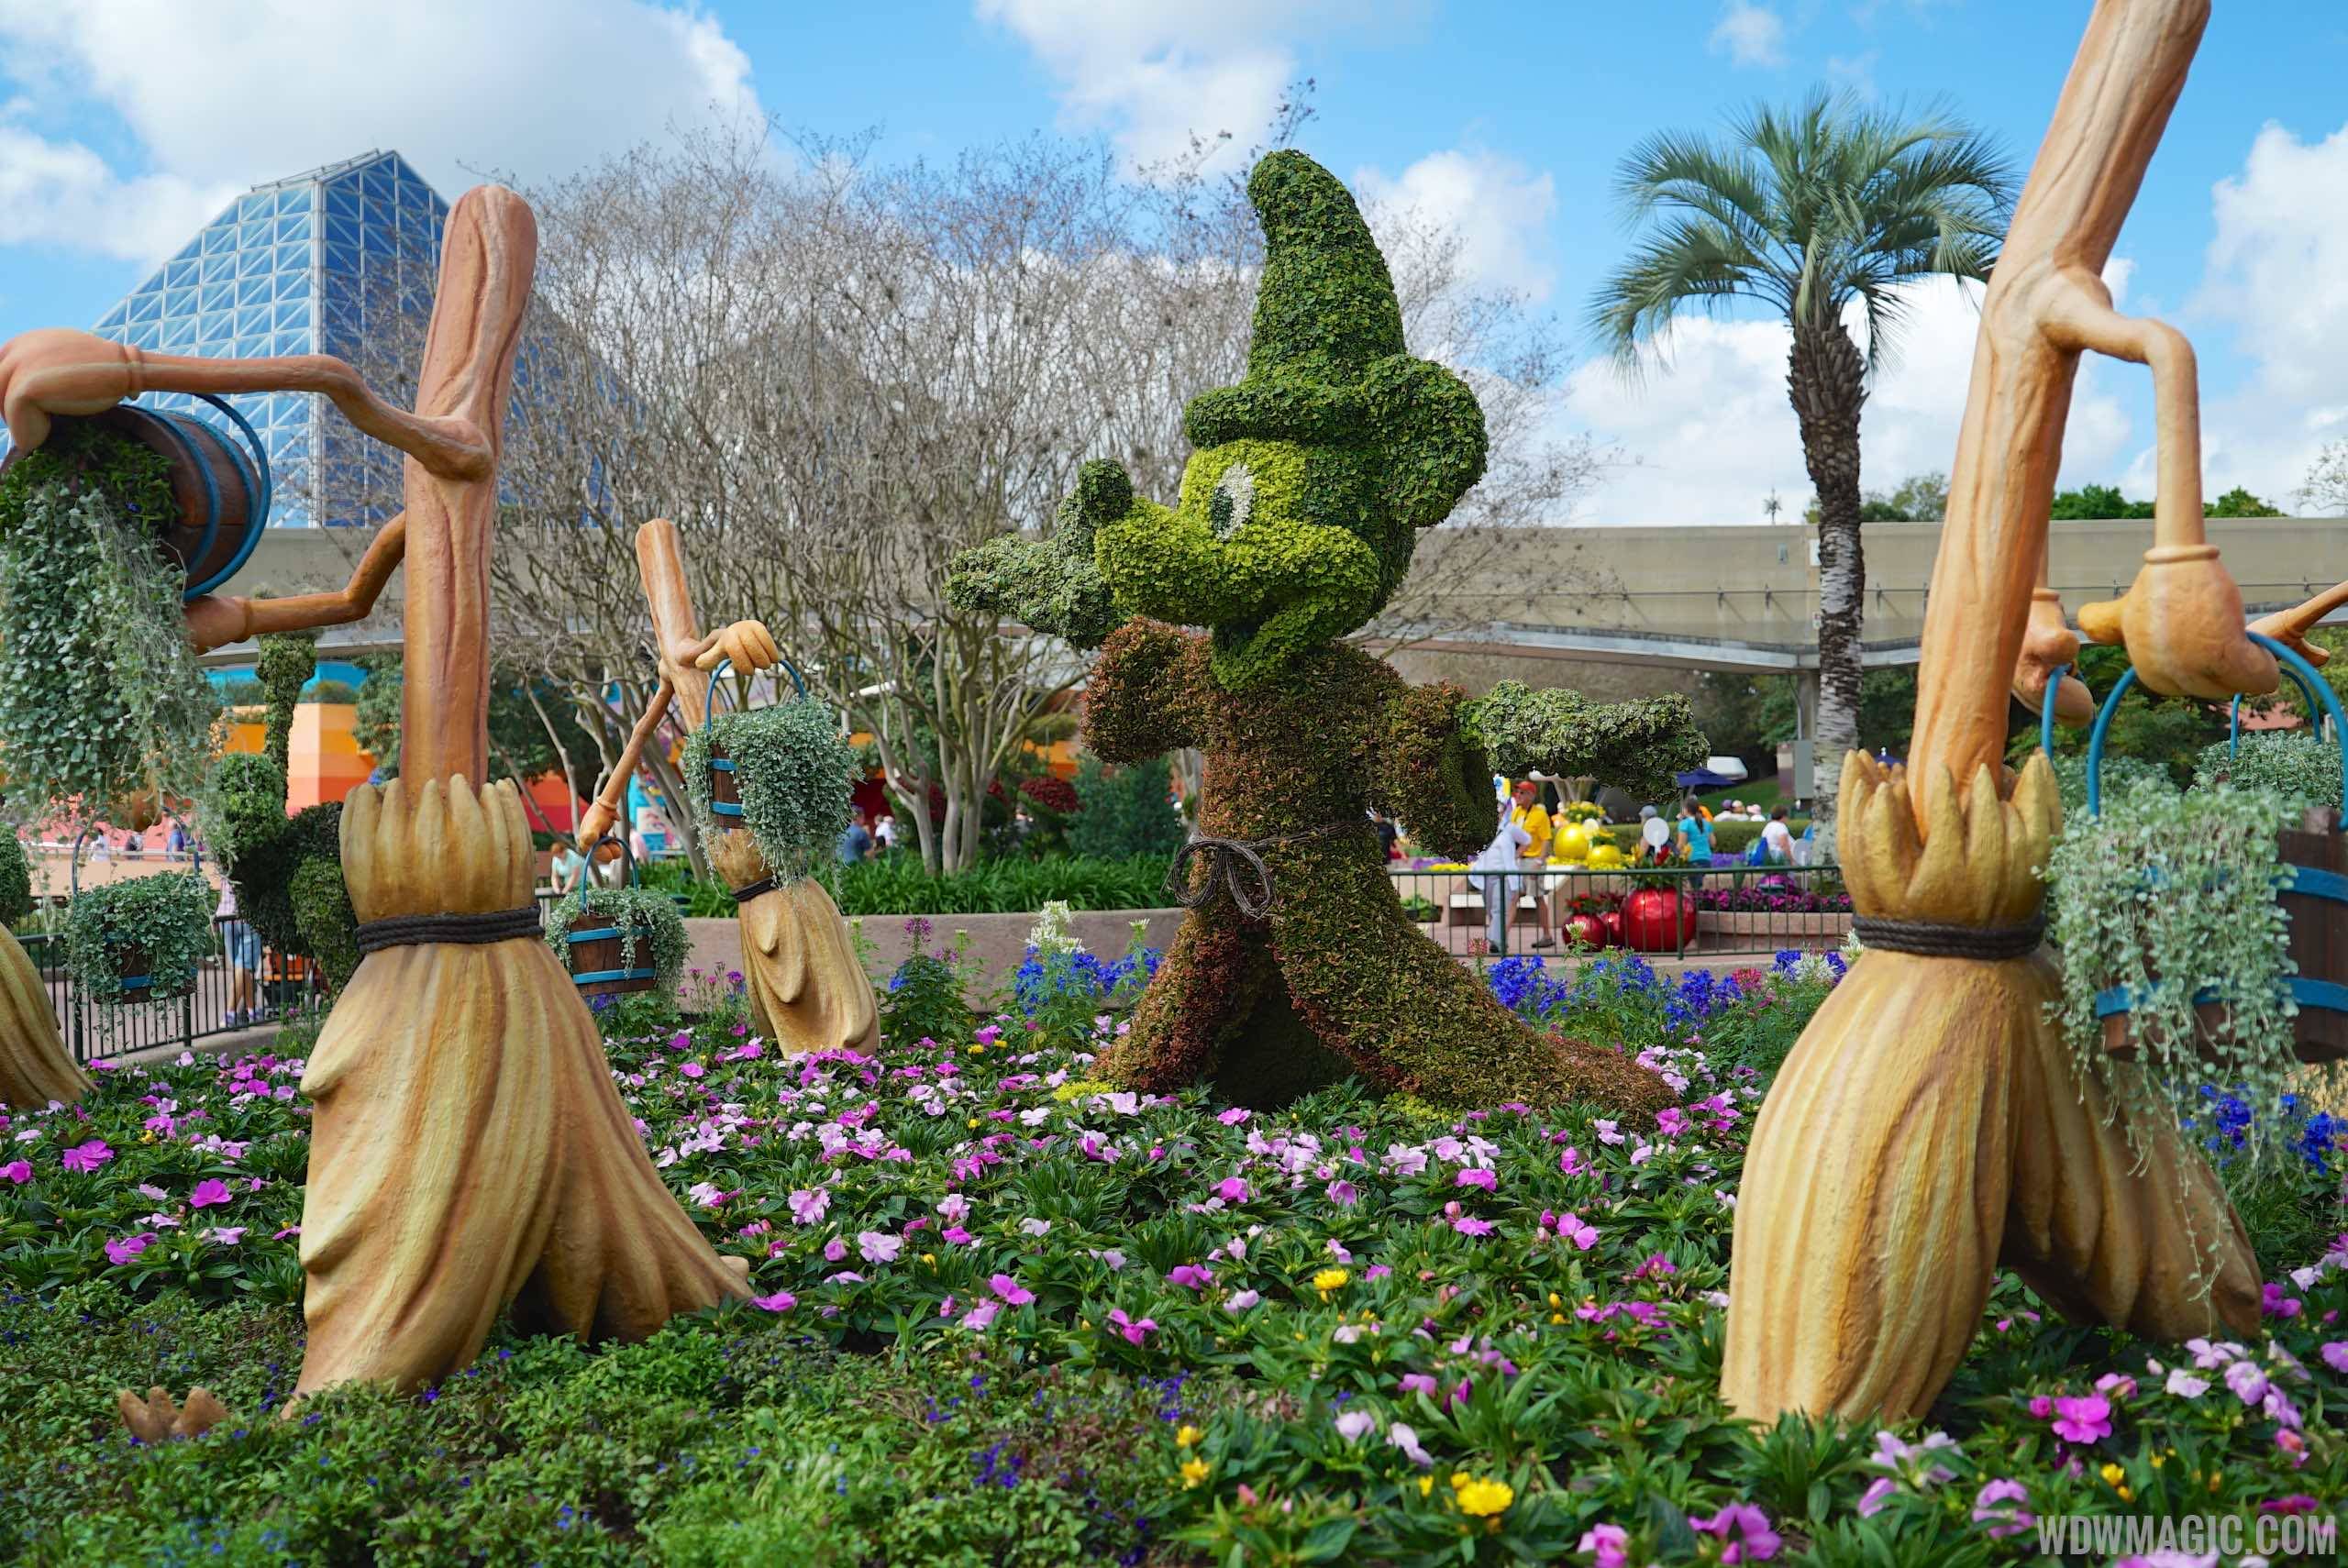 2015 Epcot Flower and Garden Festival - Sorcerer Mickey topiary